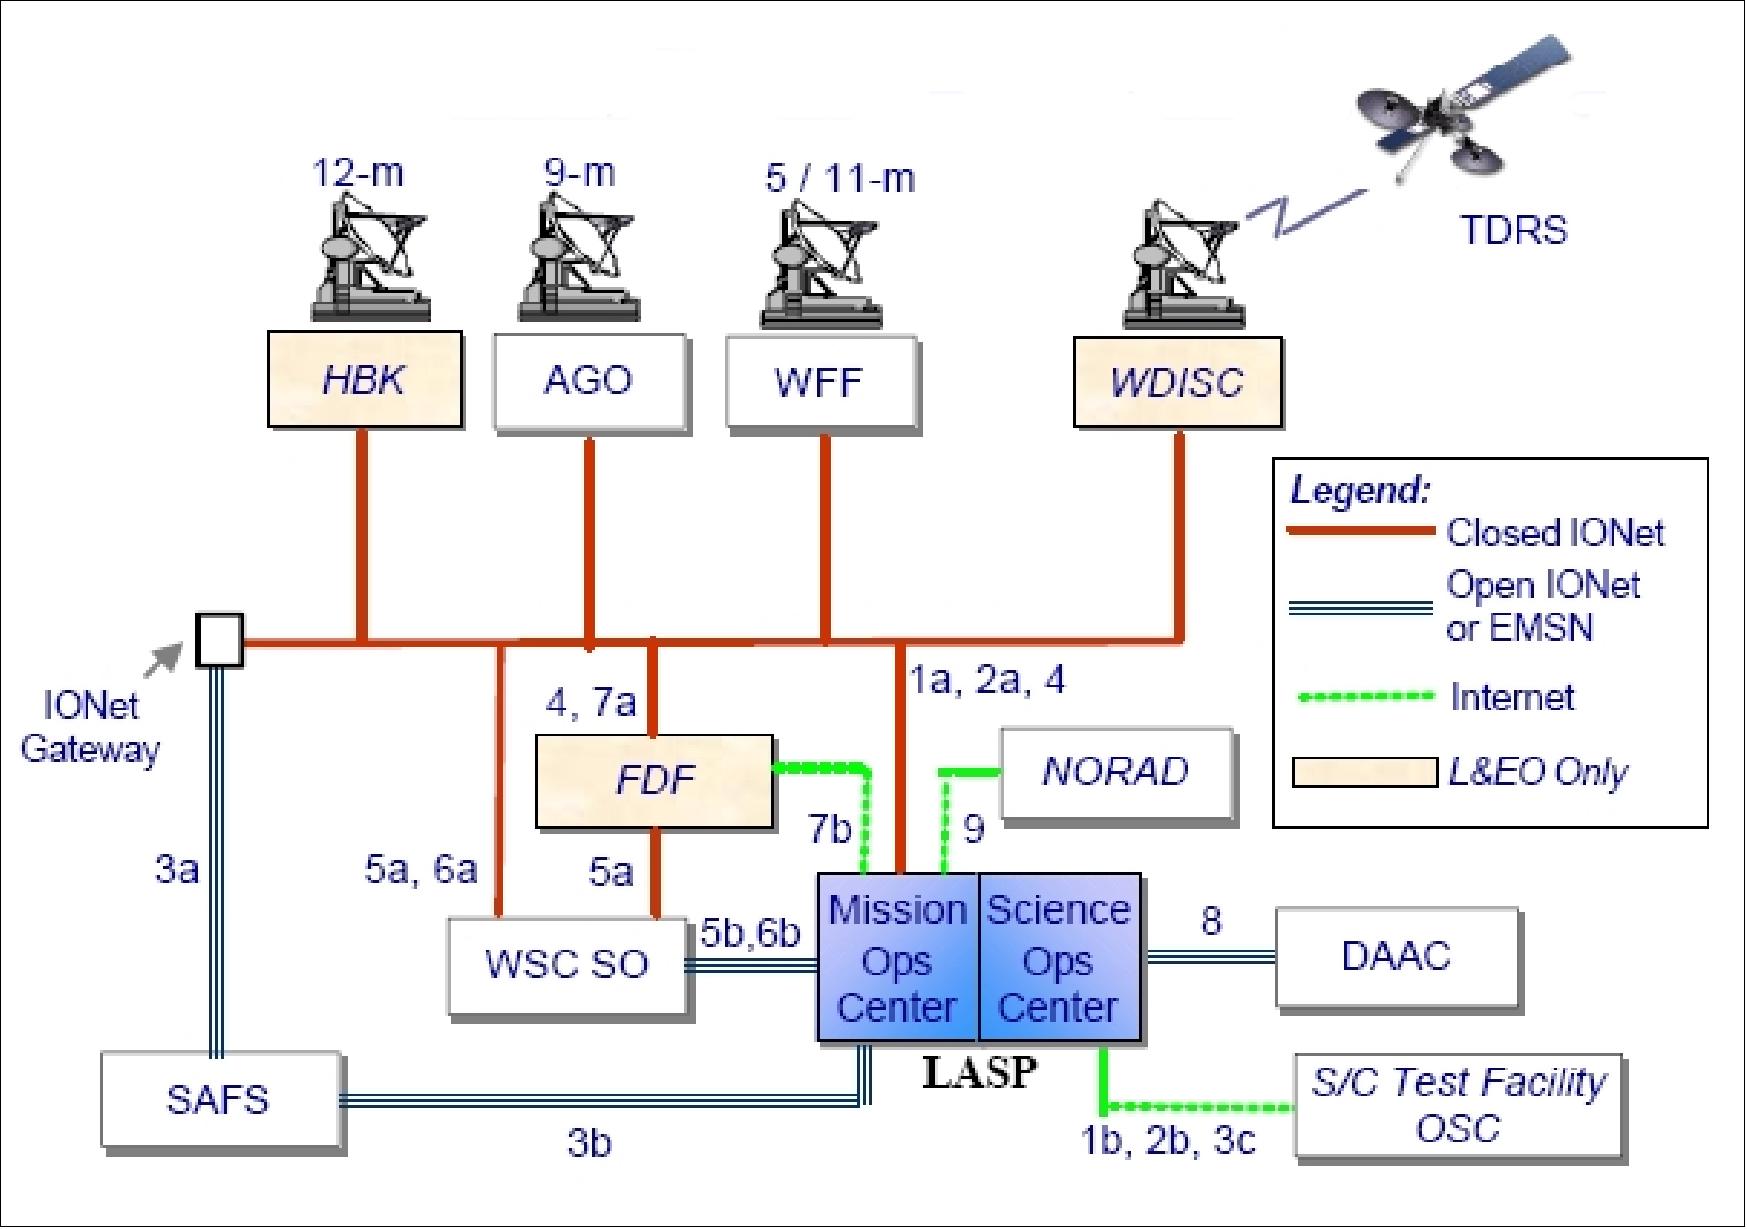 Figure 26: SORCE operations support network (image credit: LASP)